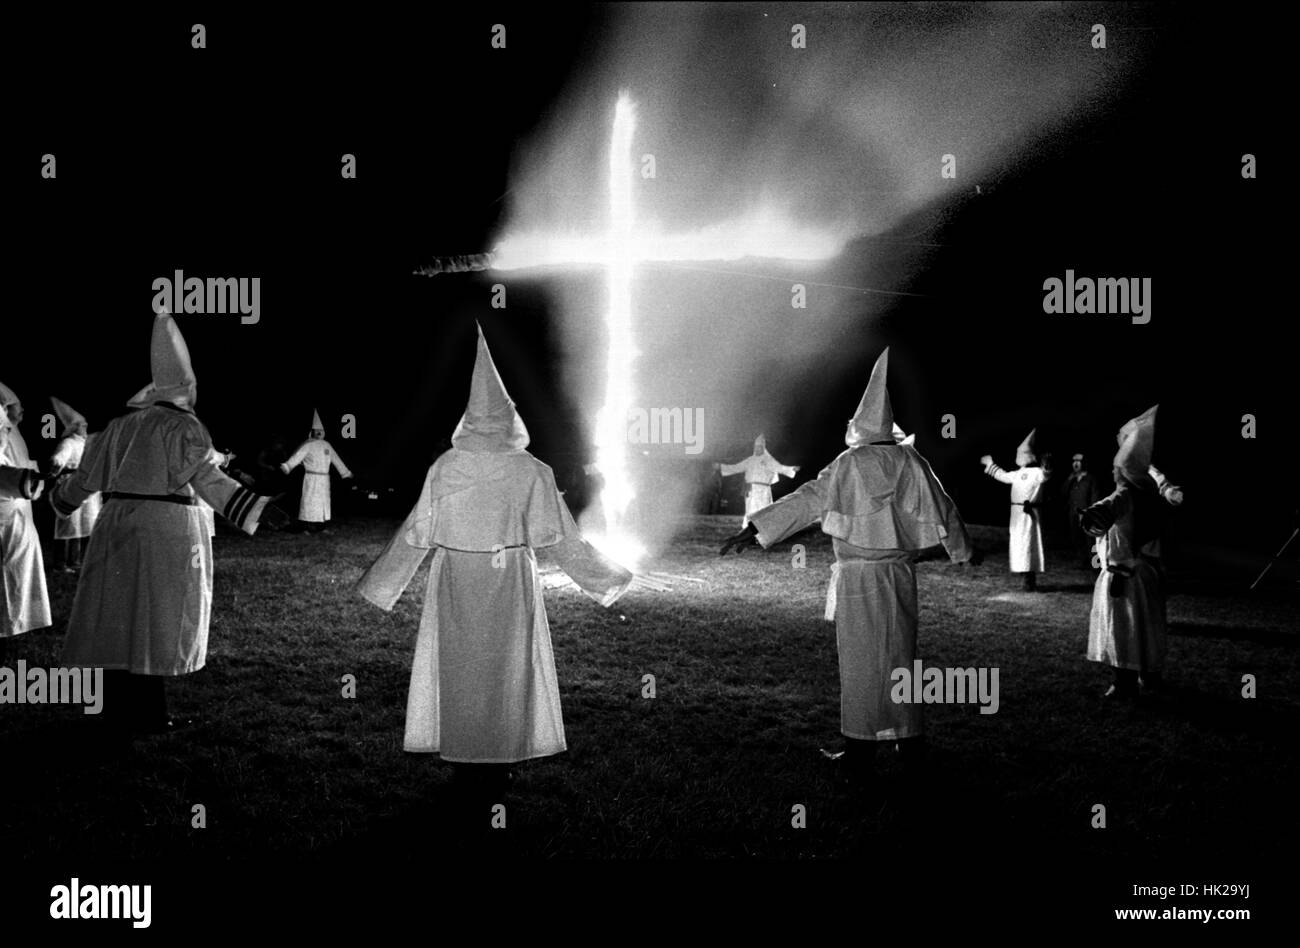 Members of the KKK circle a cross lighting in Rumford Me during rally in the small town Maine town. The Klan had been active in Maine in the 1920's and 30's , This group of Klansmen openly invited the press to observe ,photograph and report on this event photo by bill belknap Stock Photo